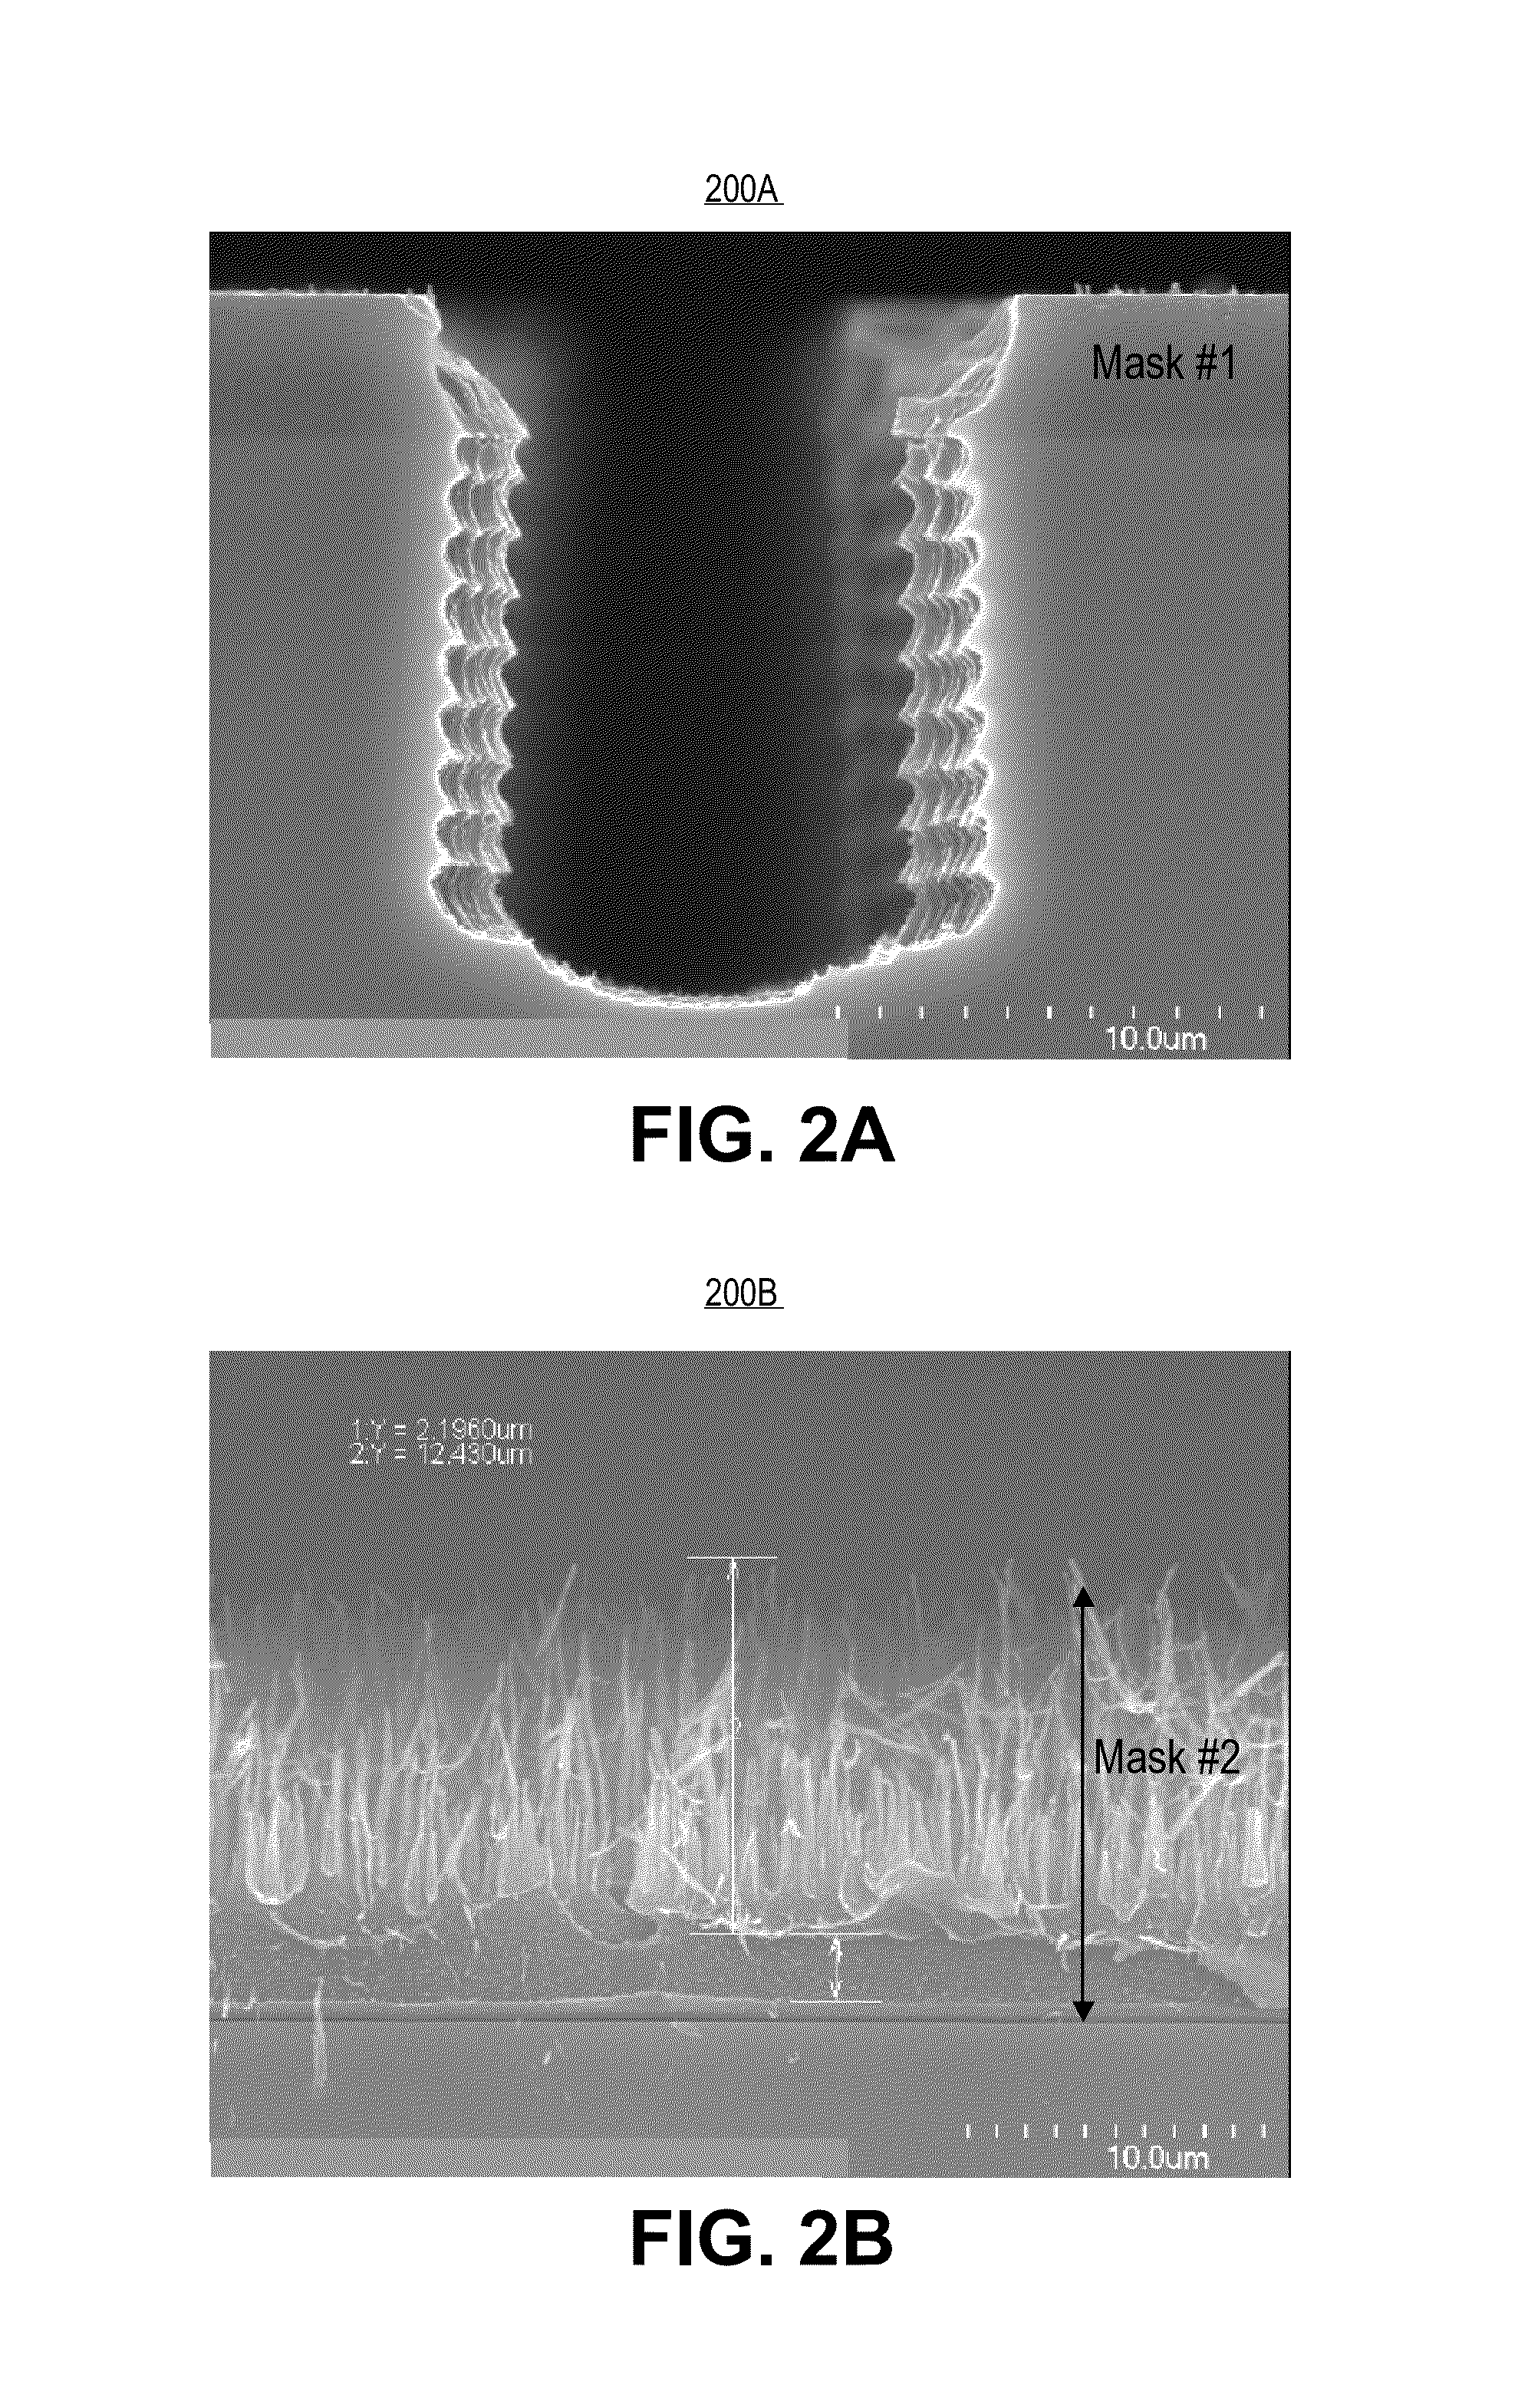 Wafer dicing using hybrid laser scribing and plasma etch approach with intermediate non-reactive post mask-opening clean